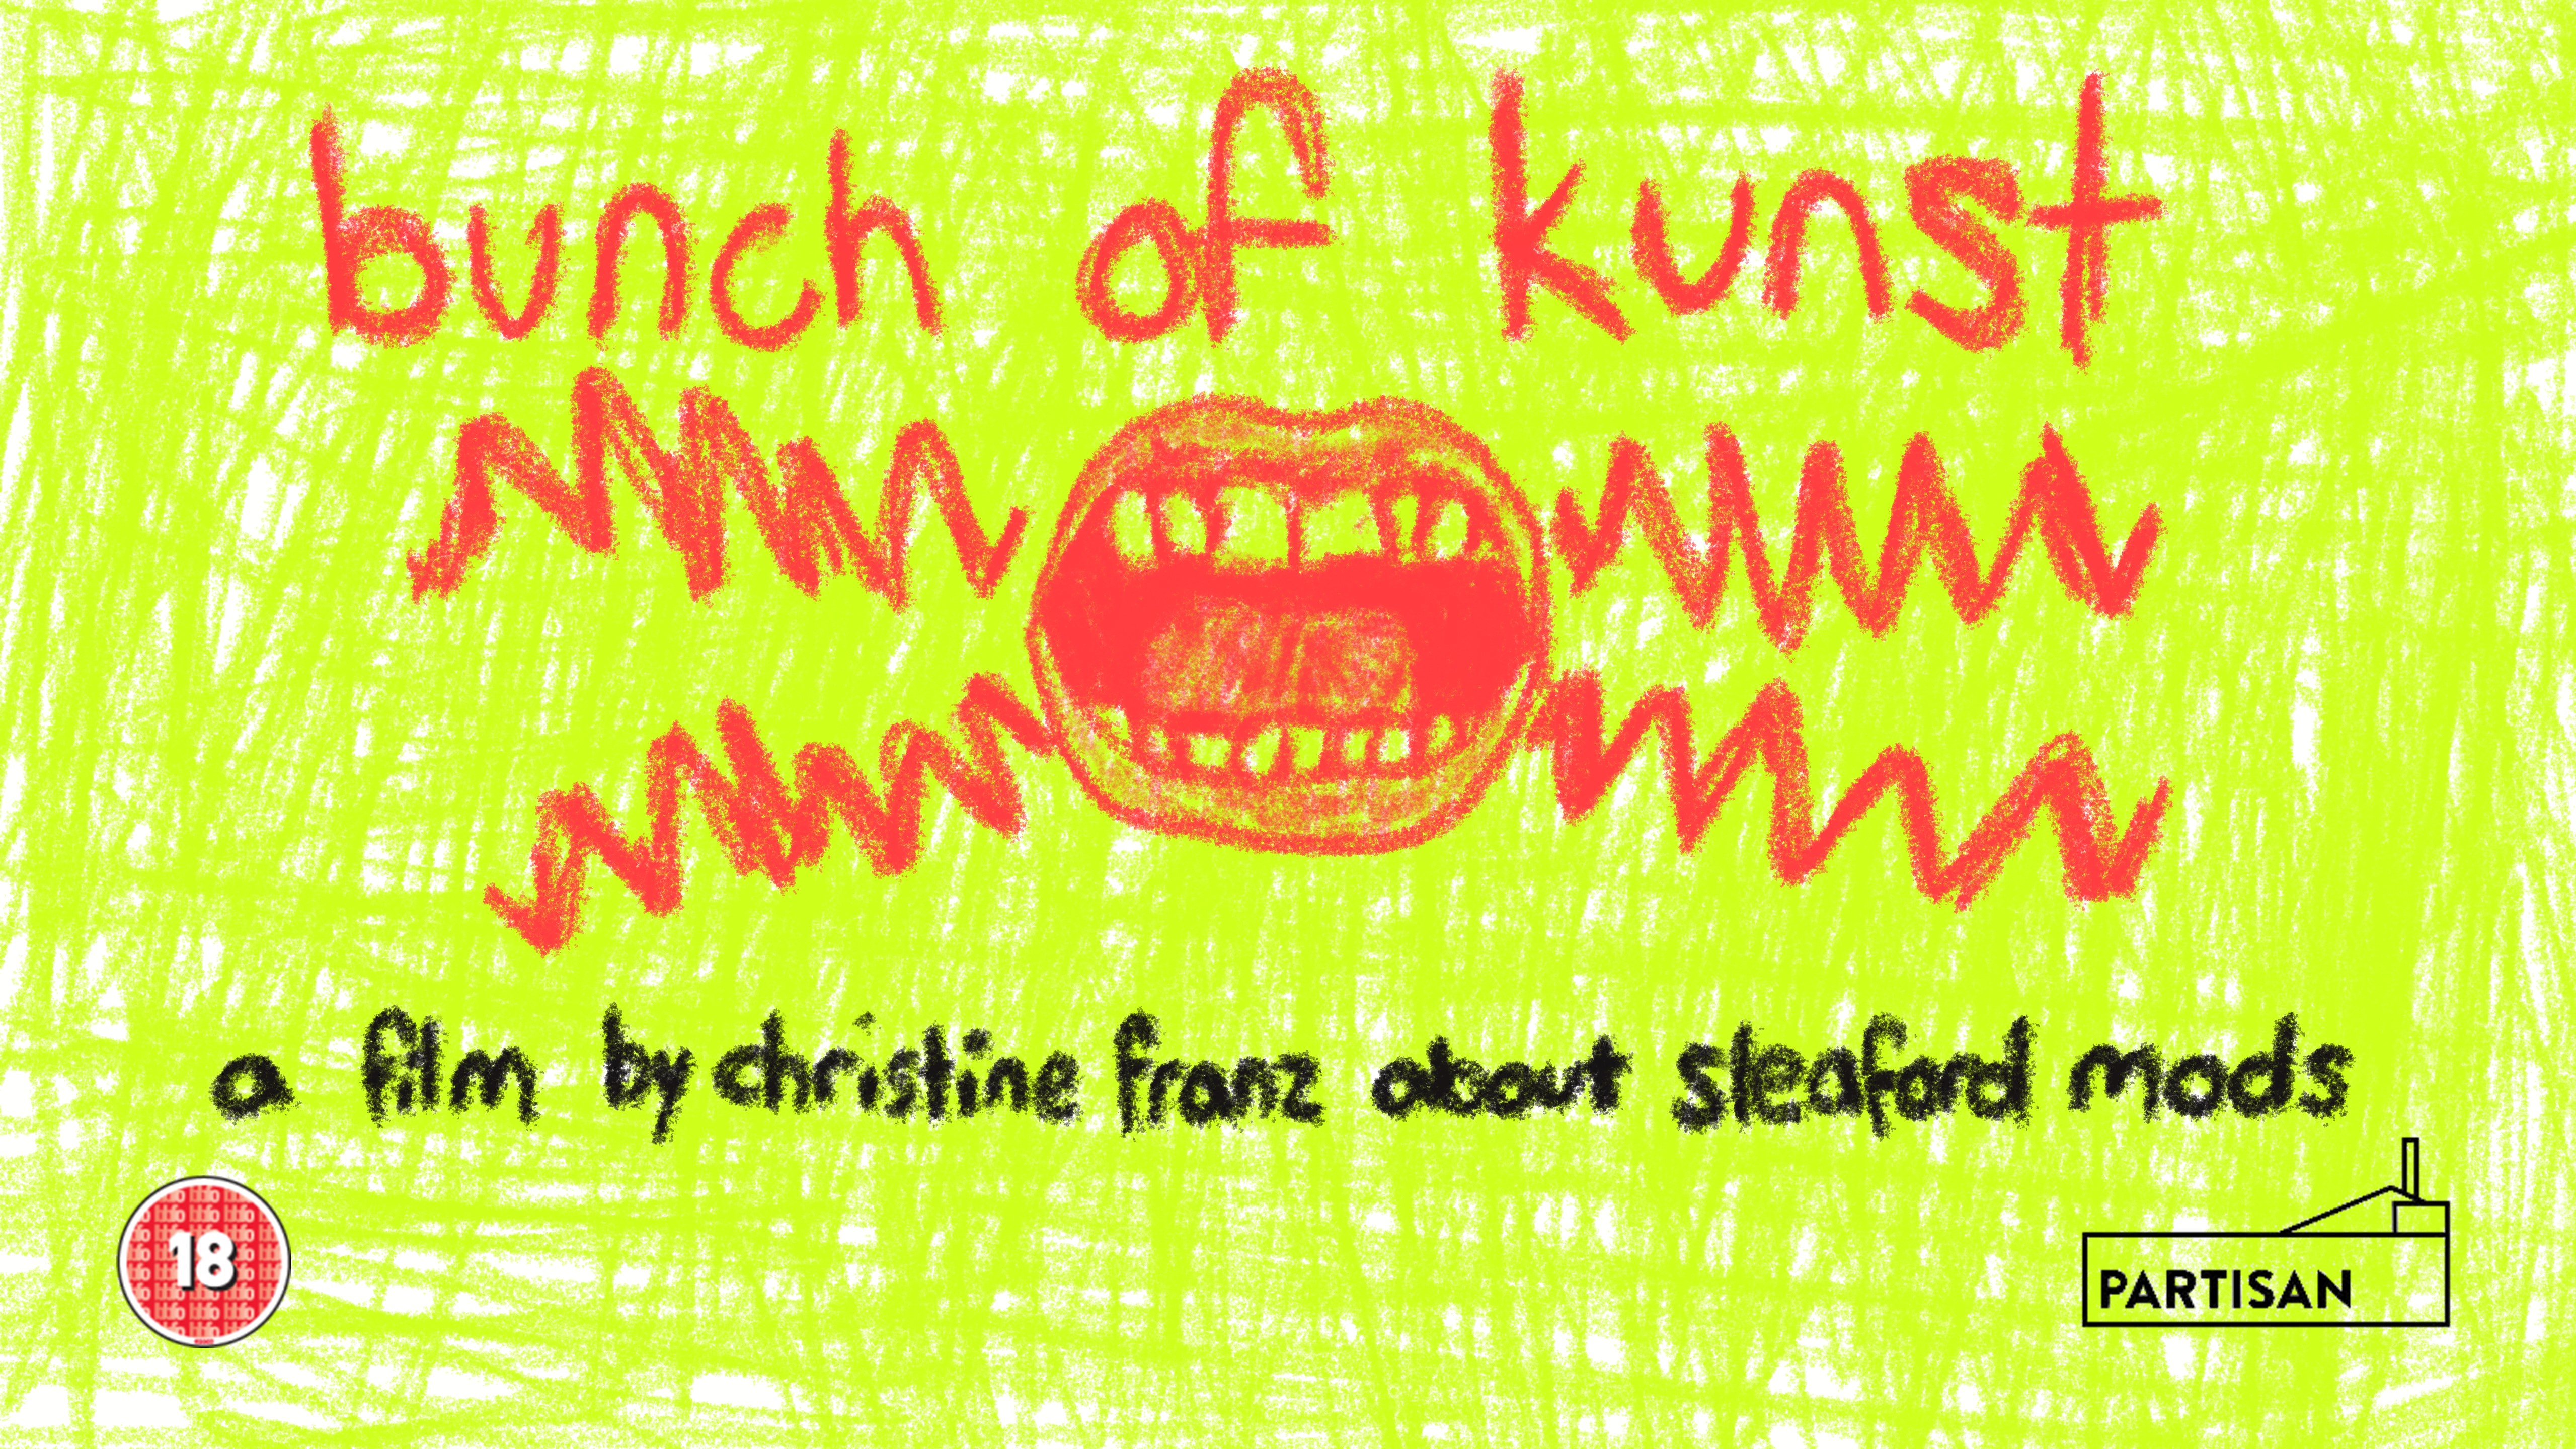 hand drawn image of a shouting mouth with the words 'bunch of kunst'in red pencil and 'a film by christine franz about sleaford mods' in black pencil on a bright green background